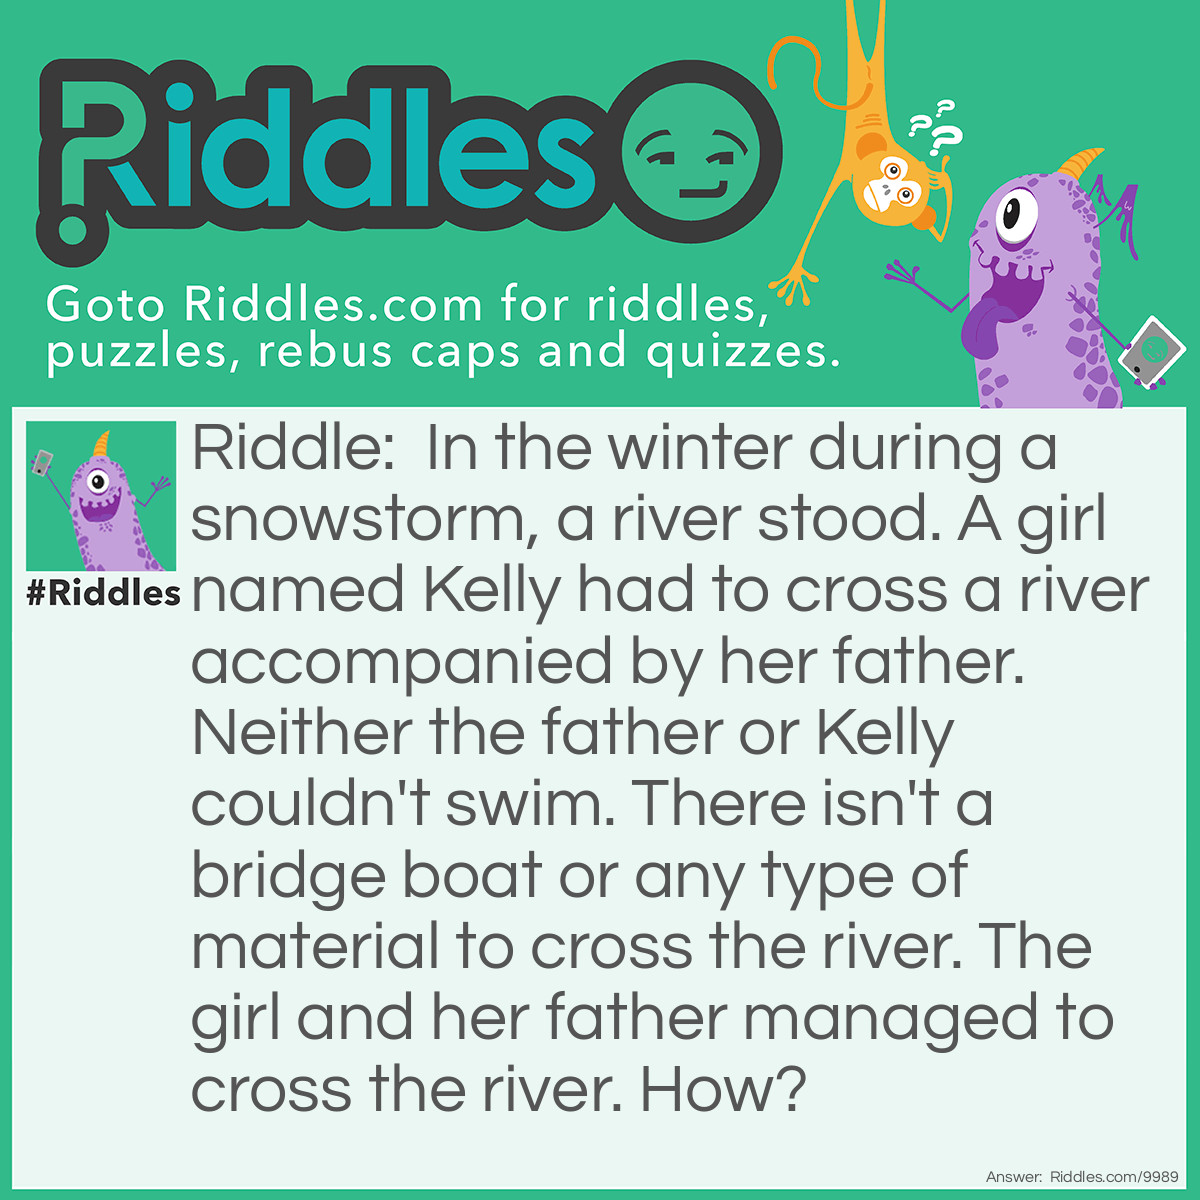 Riddle: In the winter during a snowstorm, a river stood. A girl named Kelly had to cross a river accompanied by her father. Neither the father or Kelly couldn't swim. There isn't a bridge boat or any type of material to cross the river. The girl and her father managed to cross the river. How? Answer: Don't you think rivers are frozen during the winter, ESPECIALLY during a snowstorm.